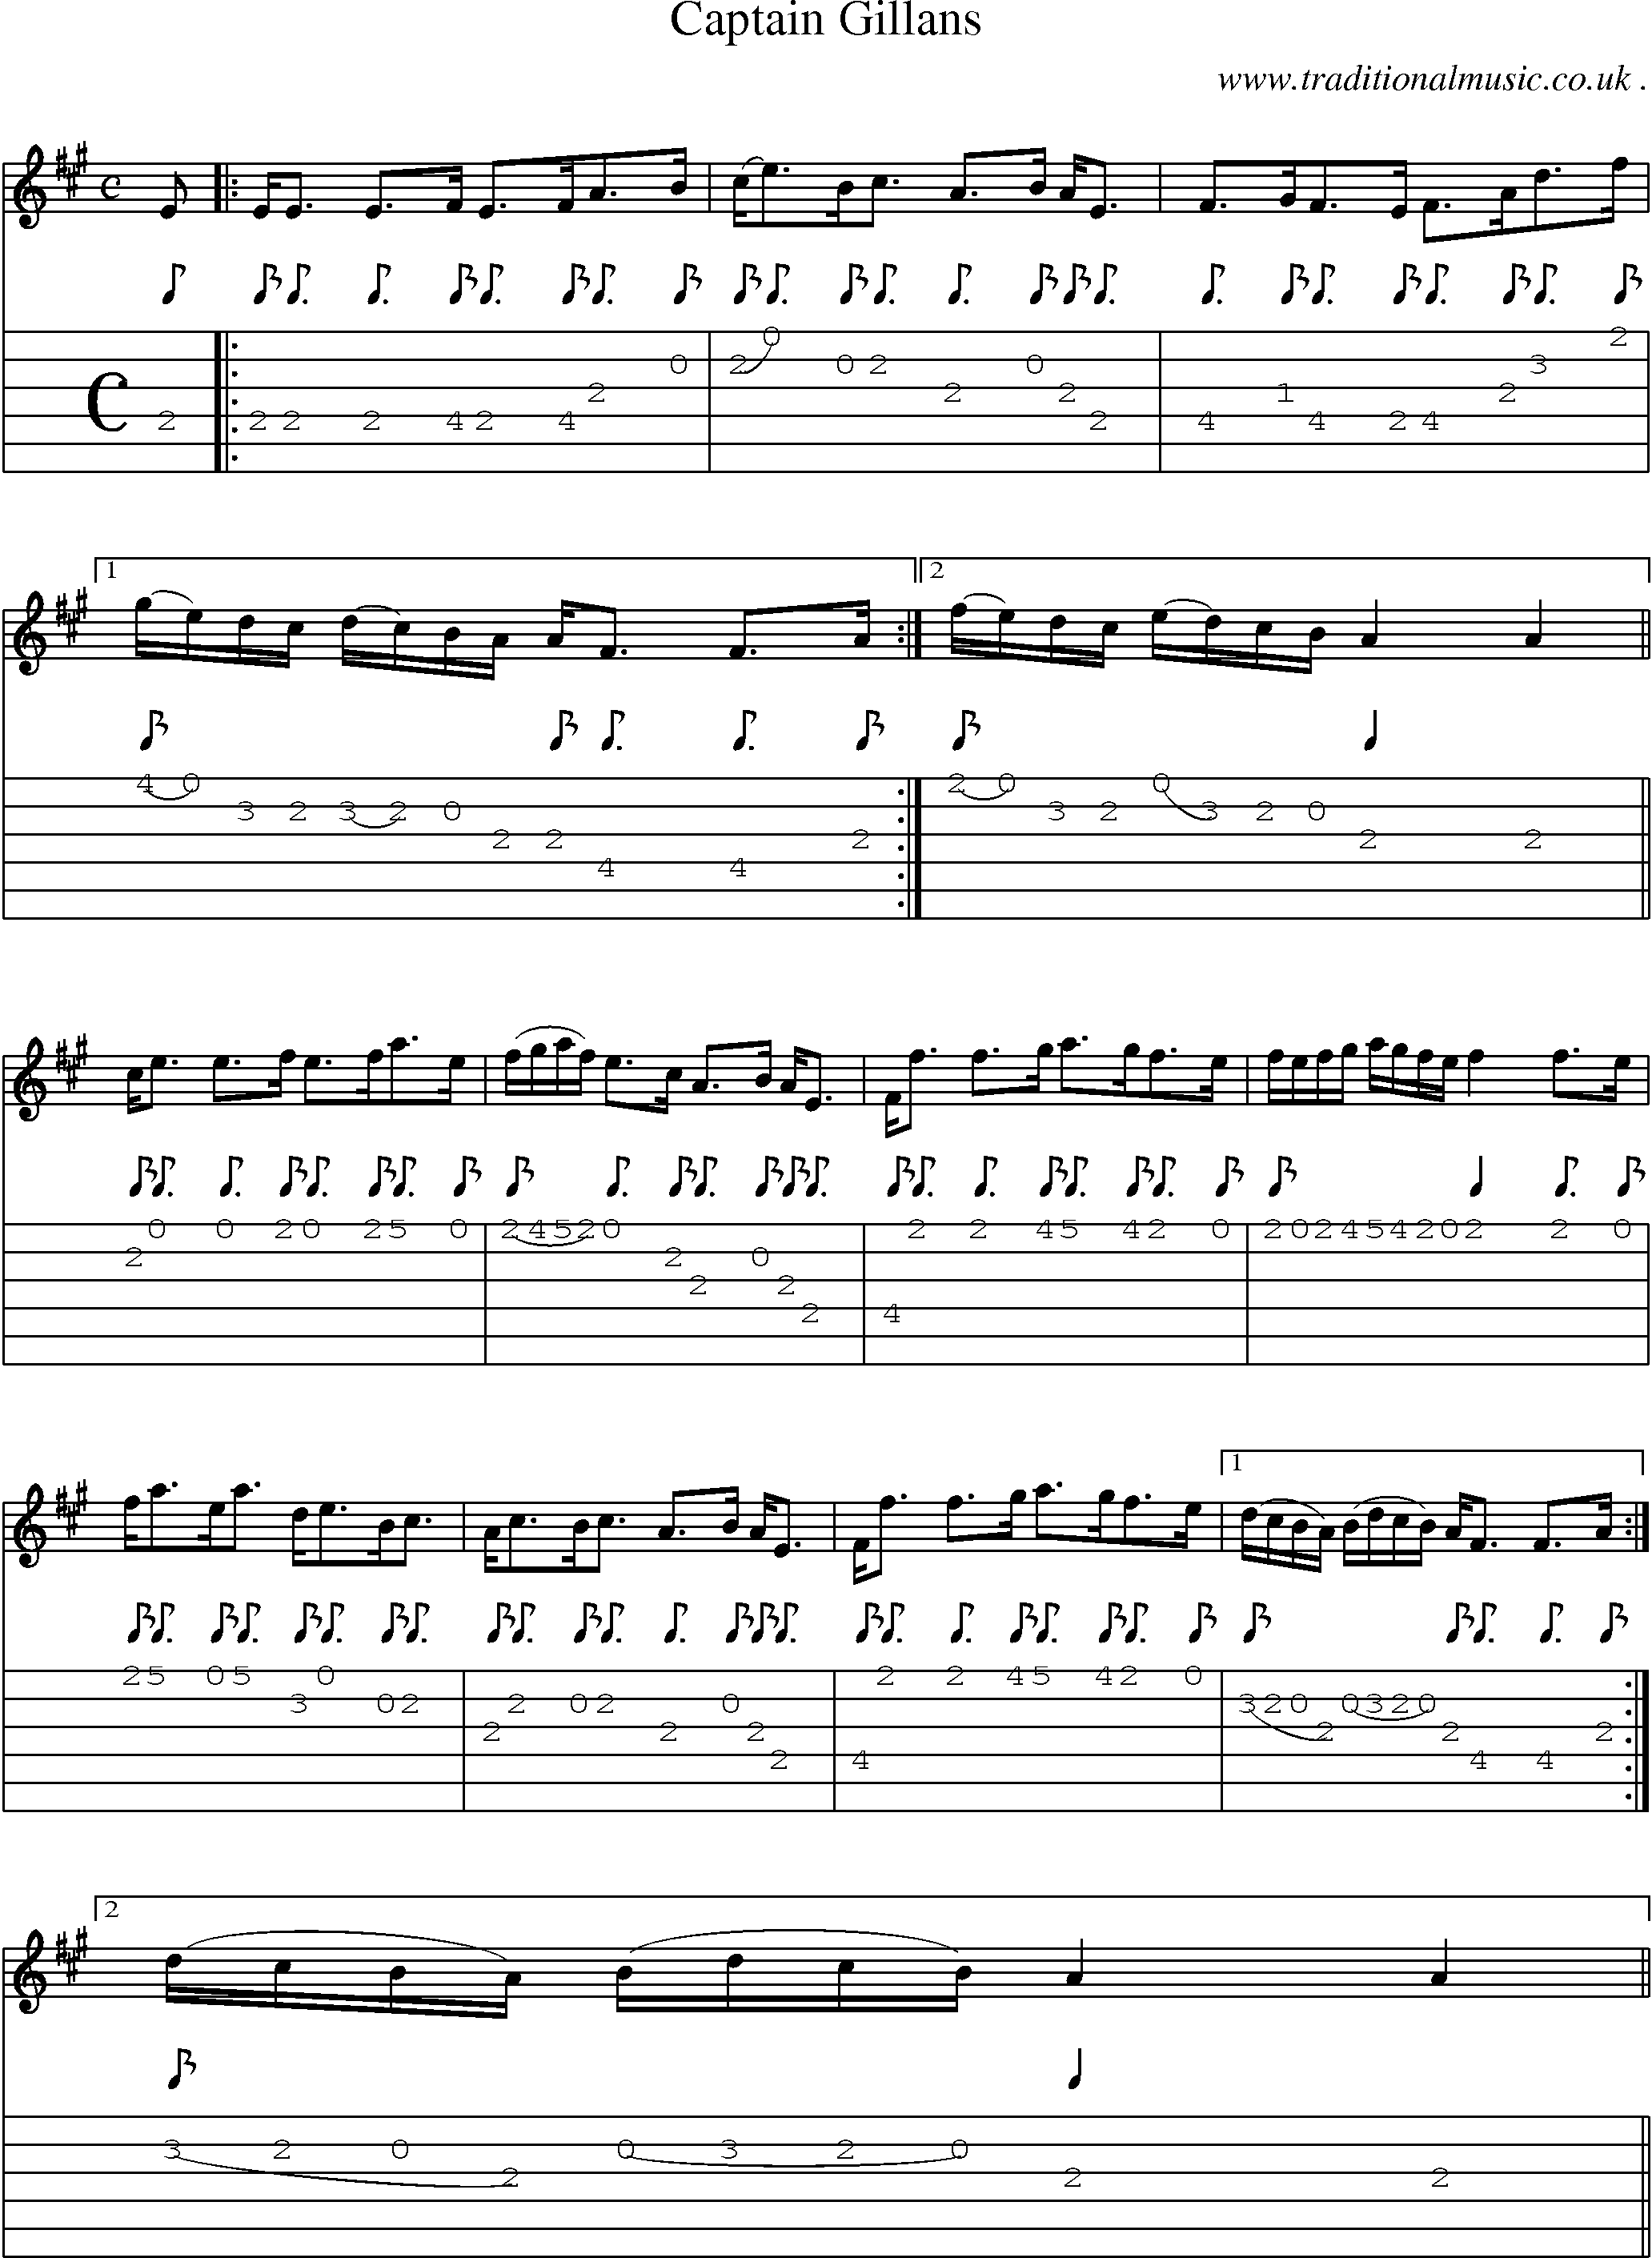 Sheet-music  score, Chords and Guitar Tabs for Captain Gillans